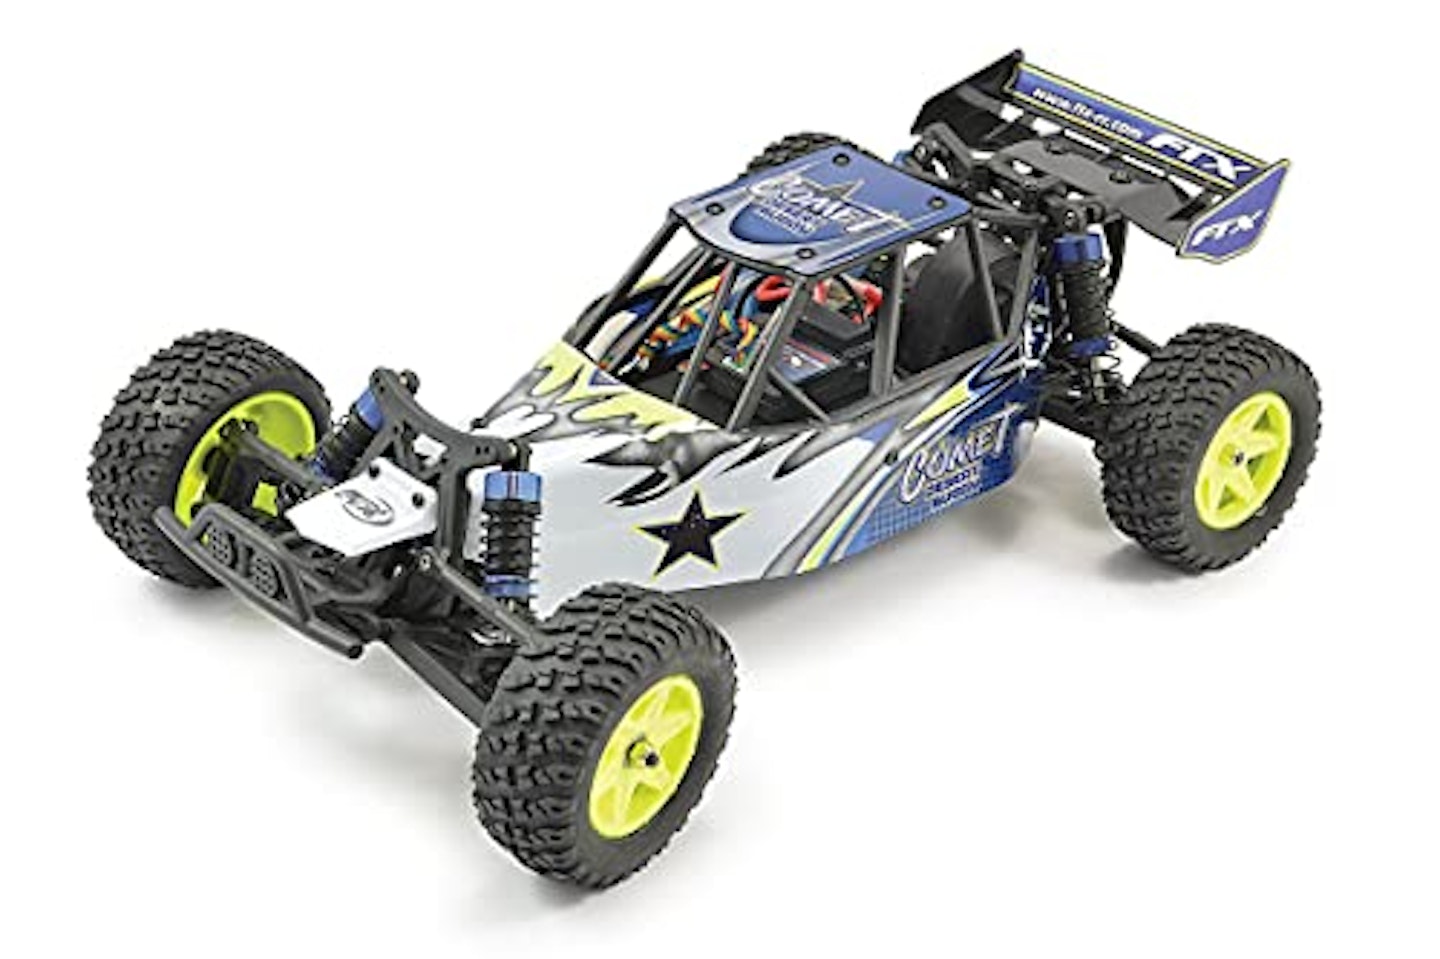 FTX FTX5519 Comet 1/12 Brushed Desert Cage Buggy Cars RC, Blue/Yellow/White